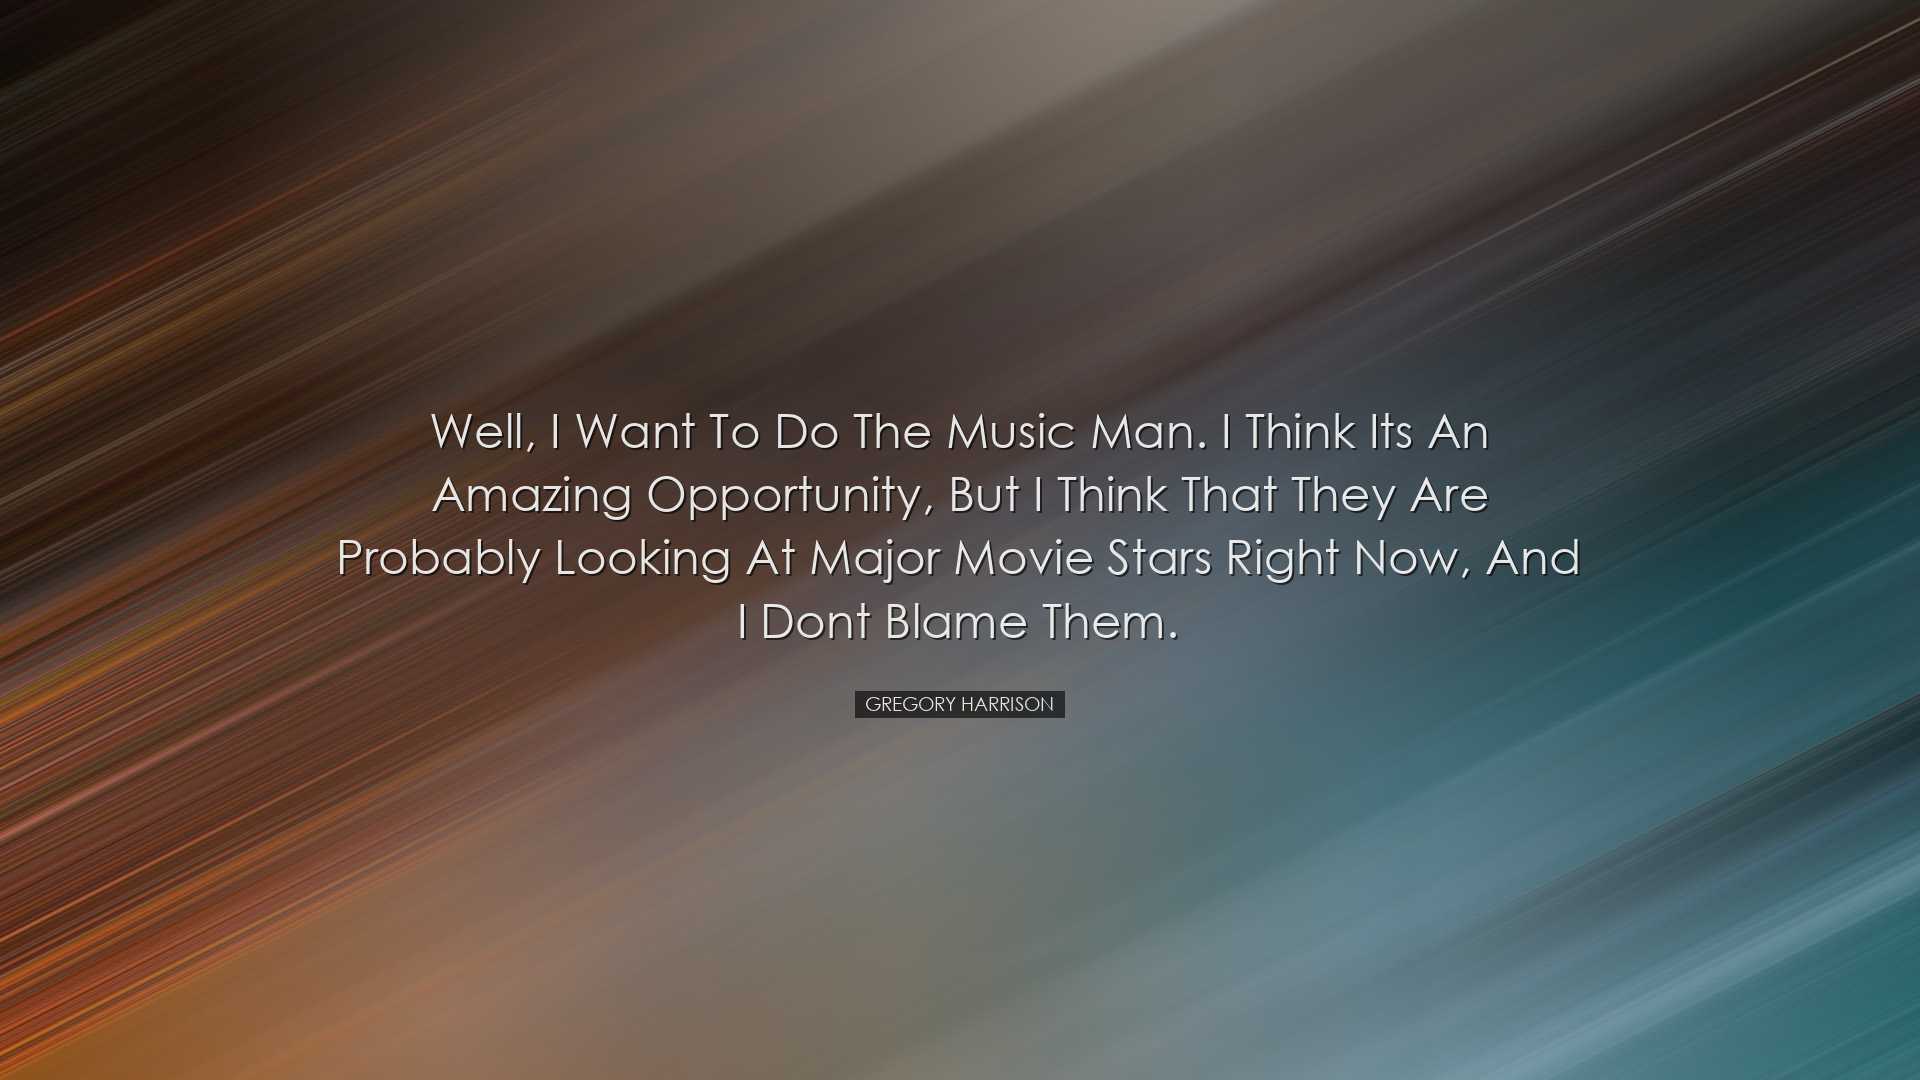 Well, I want to do The Music Man. I think its an amazing opportuni